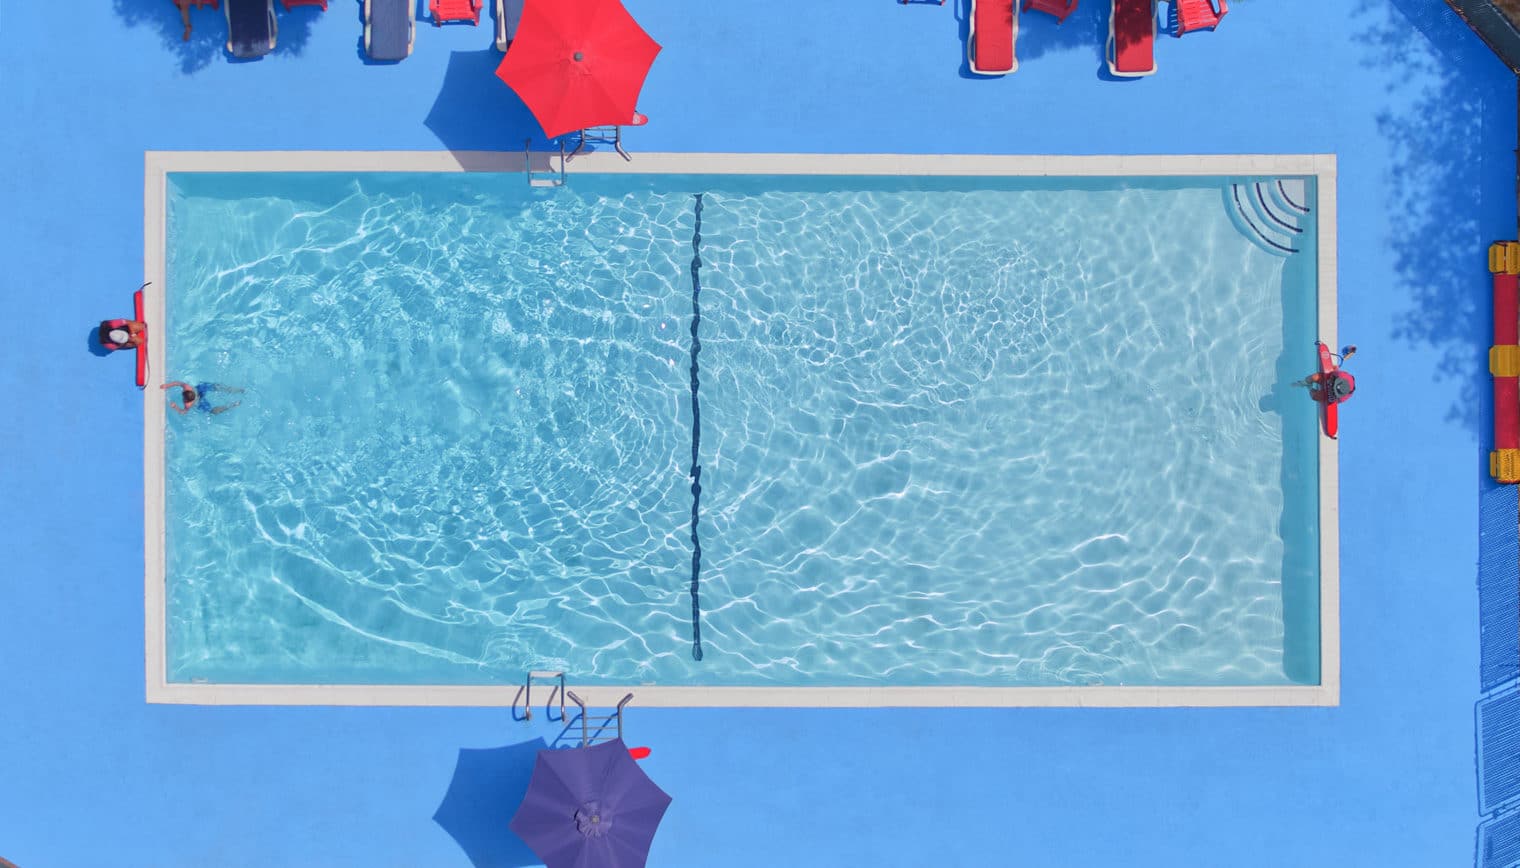 An aerial view of an outdoor swimming pool.